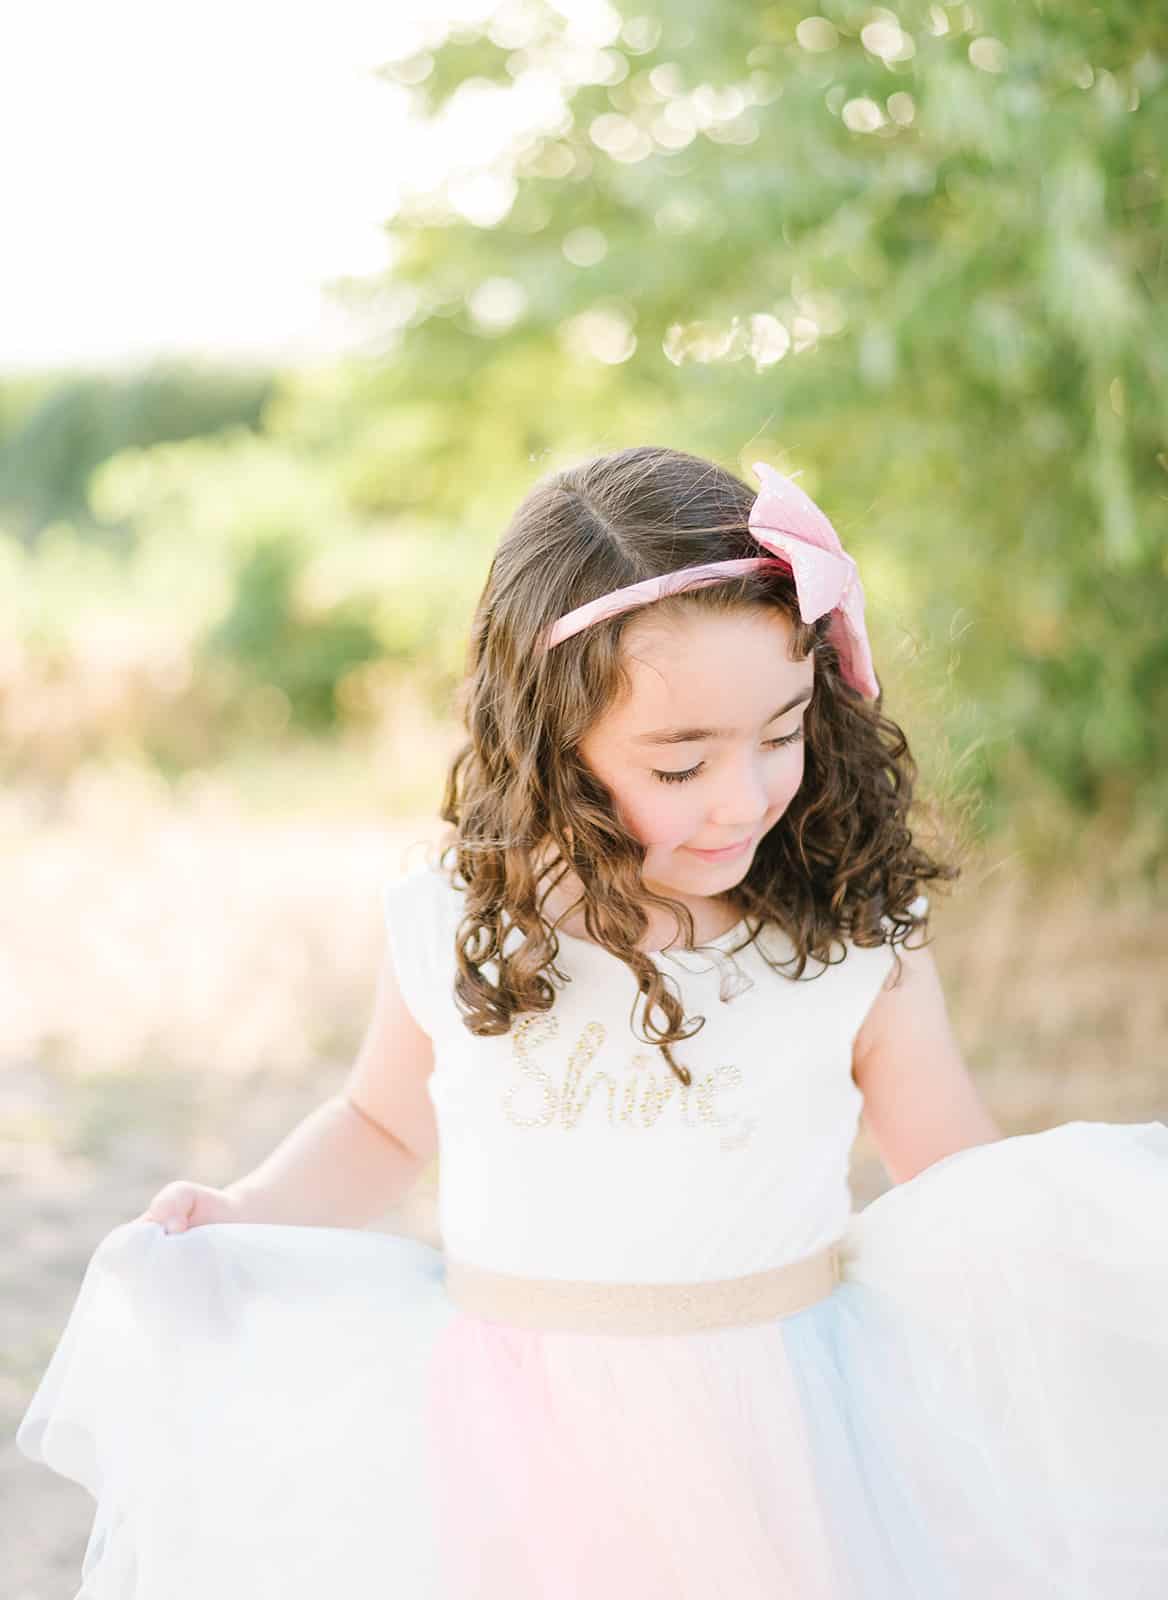 Session Planning Guide – Kara Inzunza Photography